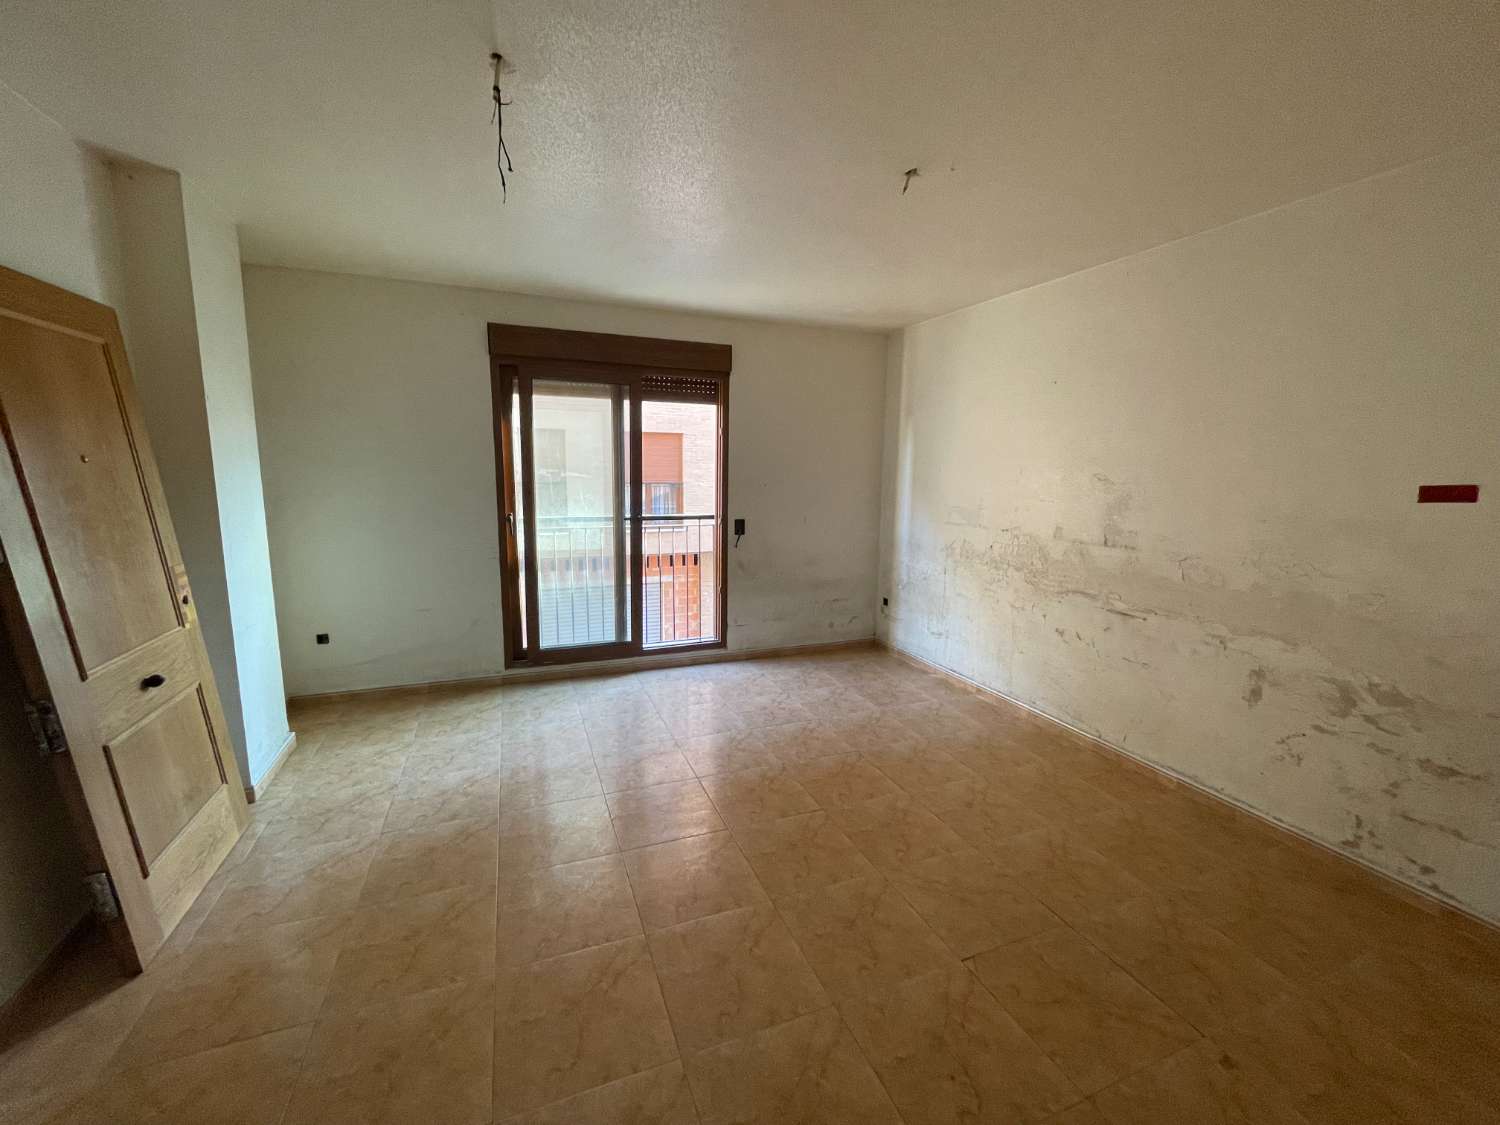 Flat for sale in Archena